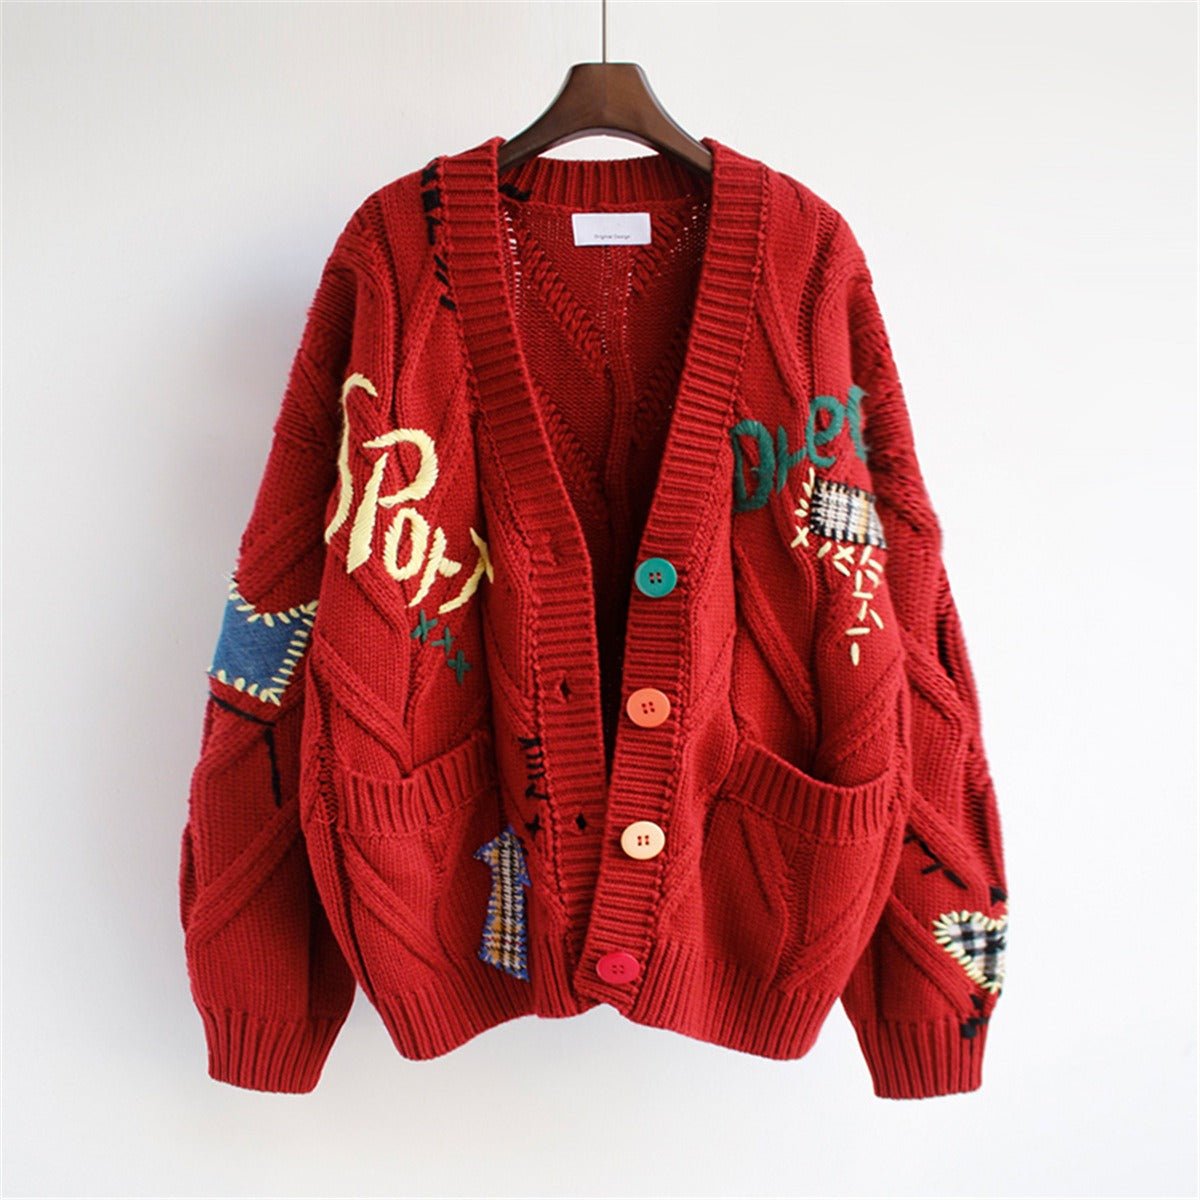 Embroidered Collage Knitted Jacket - Kelly Obi New York